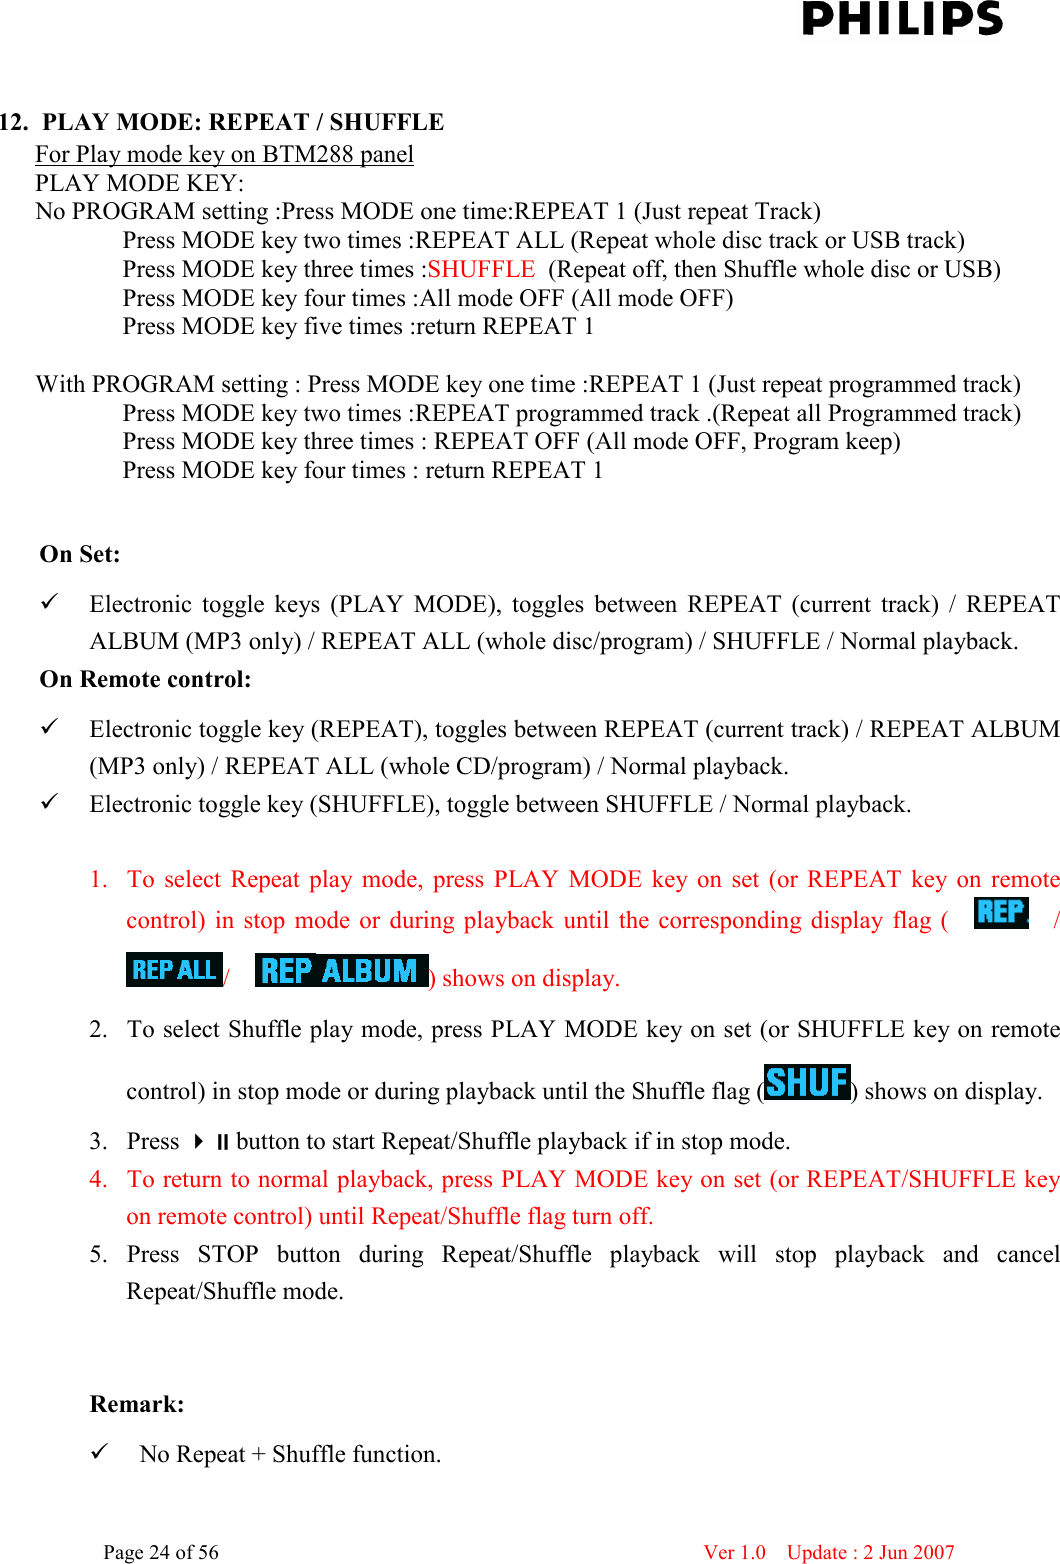    Page 24 of 56                      Ver 1.0    Update : 2 Jun 2007   12. PLAY MODE: REPEAT / SHUFFLE For Play mode key on BTM288 panel PLAY MODE KEY: No PROGRAM setting :Press MODE one time:REPEAT 1 (Just repeat Track)               Press MODE key two times :REPEAT ALL (Repeat whole disc track or USB track)               Press MODE key three times :SHUFFLE  (Repeat off, then Shuffle whole disc or USB)                  Press MODE key four times :All mode OFF (All mode OFF)               Press MODE key five times :return REPEAT 1     With PROGRAM setting : Press MODE key one time :REPEAT 1 (Just repeat programmed track)               Press MODE key two times :REPEAT programmed track .(Repeat all Programmed track)               Press MODE key three times : REPEAT OFF (All mode OFF, Program keep)               Press MODE key four times : return REPEAT 1    On Set:    Electronic  toggle  keys  (PLAY  MODE),  toggles  between  REPEAT  (current  track)  /  REPEAT ALBUM (MP3 only) / REPEAT ALL (whole disc/program) / SHUFFLE / Normal playback. On Remote control:    Electronic toggle key (REPEAT), toggles between REPEAT (current track) / REPEAT ALBUM (MP3 only) / REPEAT ALL (whole CD/program) / Normal playback.  Electronic toggle key (SHUFFLE), toggle between SHUFFLE / Normal playback.  1. To  select  Repeat  play mode,  press  PLAY  MODE  key  on  set  (or  REPEAT  key  on  remote control)  in  stop  mode  or  during  playback  until  the  corresponding  display  flag  (        /     /    ) shows on display. 2. To select Shuffle play mode, press PLAY MODE key on set (or SHUFFLE key on remote control) in stop mode or during playback until the Shuffle flag ( ) shows on display. 3. Press button to start Repeat/Shuffle playback if in stop mode.   4. To return to normal playback, press PLAY MODE key on set (or REPEAT/SHUFFLE key on remote control) until Repeat/Shuffle flag turn off. 5. Press  STOP  button  during  Repeat/Shuffle  playback  will  stop  playback  and  cancel Repeat/Shuffle mode.   Remark:  No Repeat + Shuffle function. 